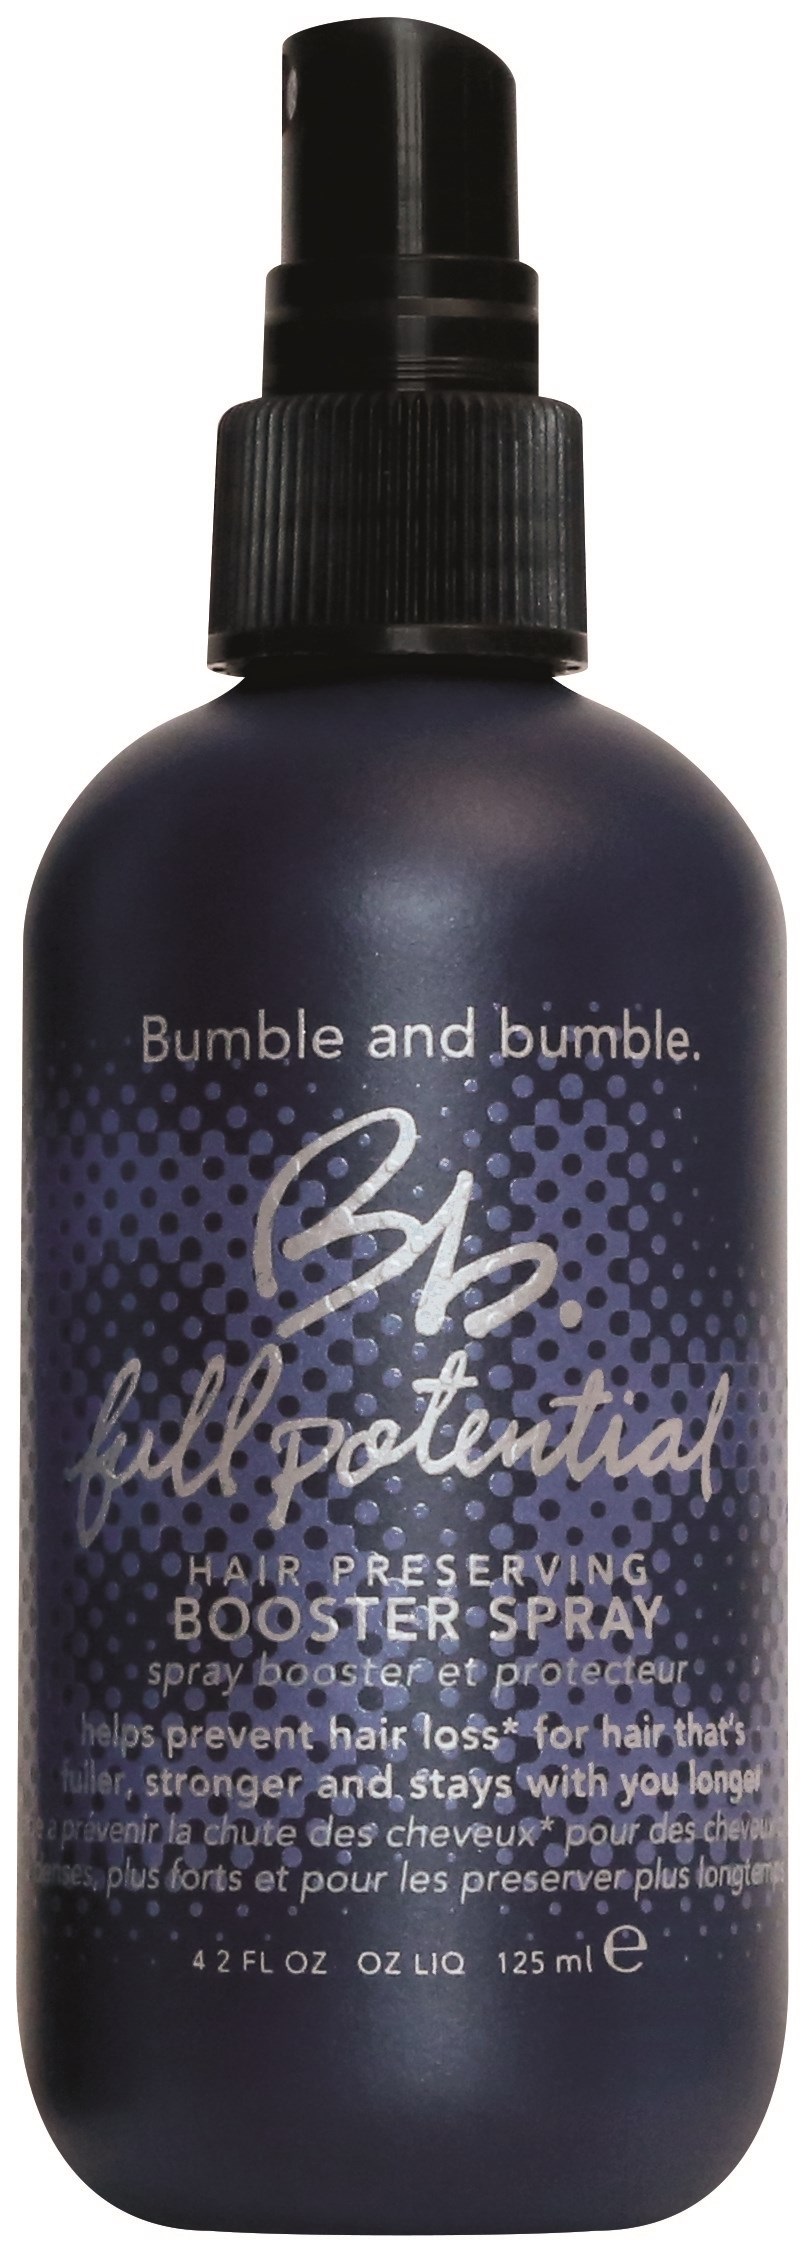 Bumble and bumble Posilující sprej na vlasy Bb. Full Potential (Booster) 125 ml